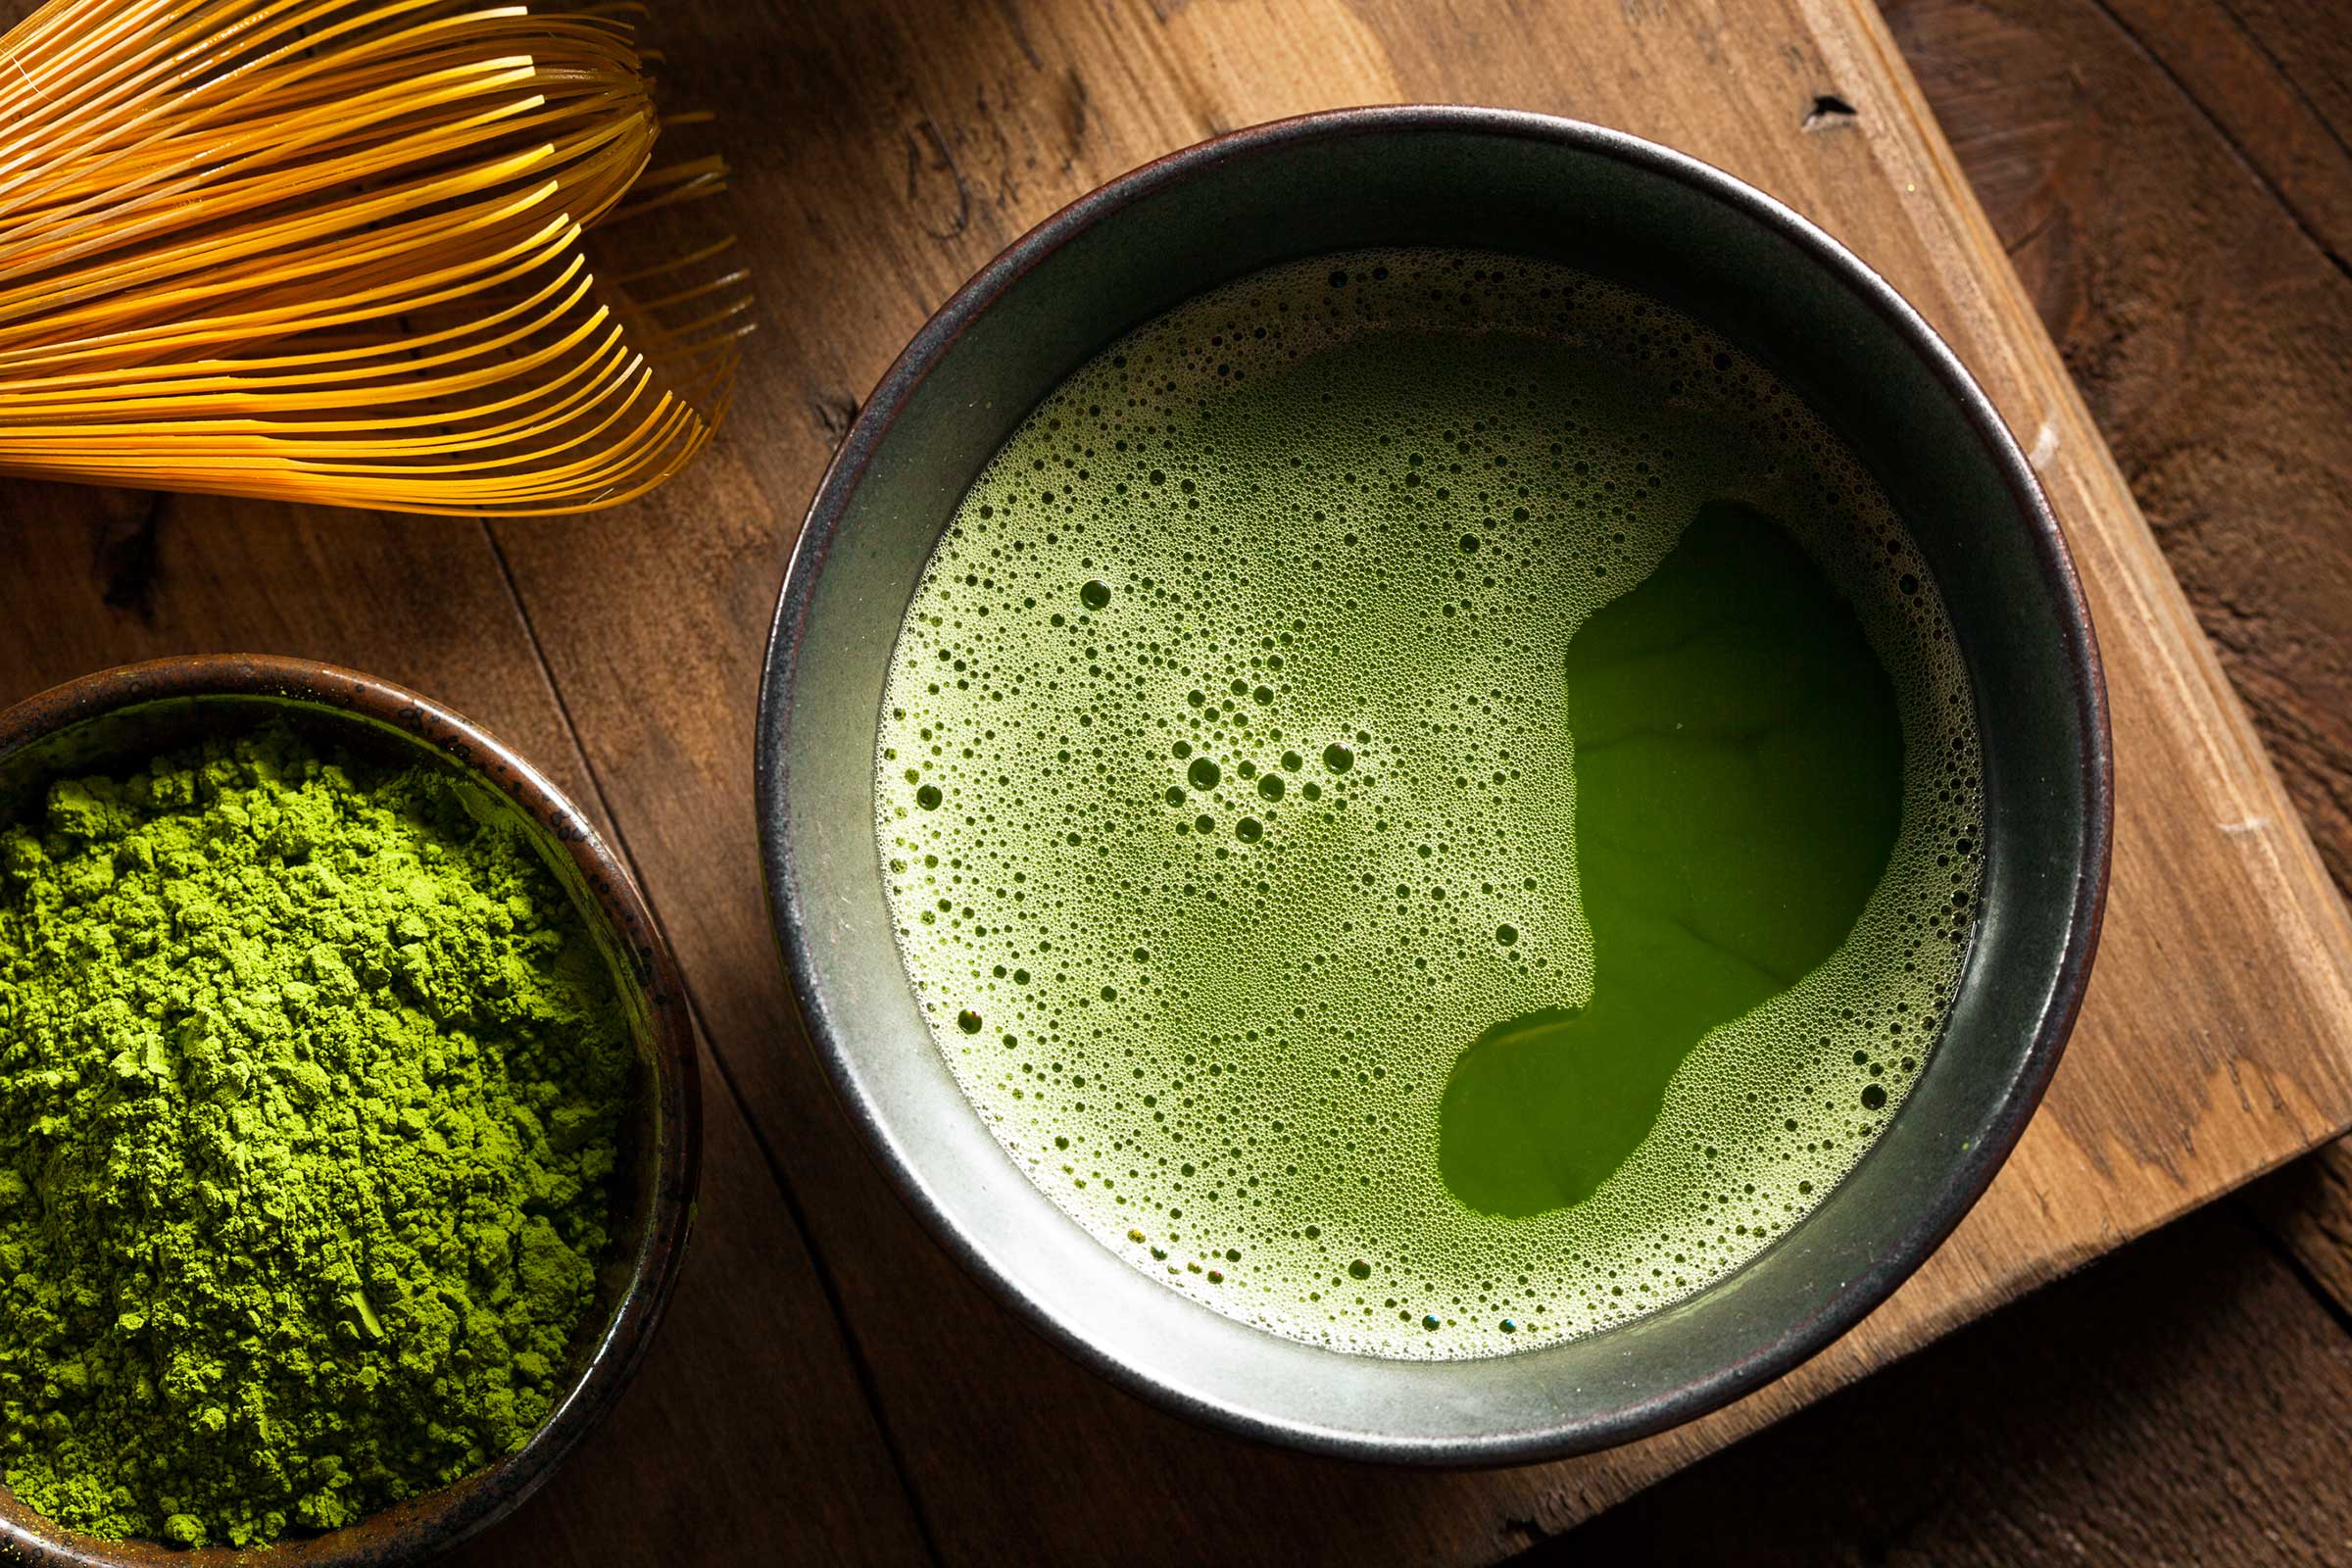 Matcha Tea Benefits: Real or Hype? | Reader's Digest